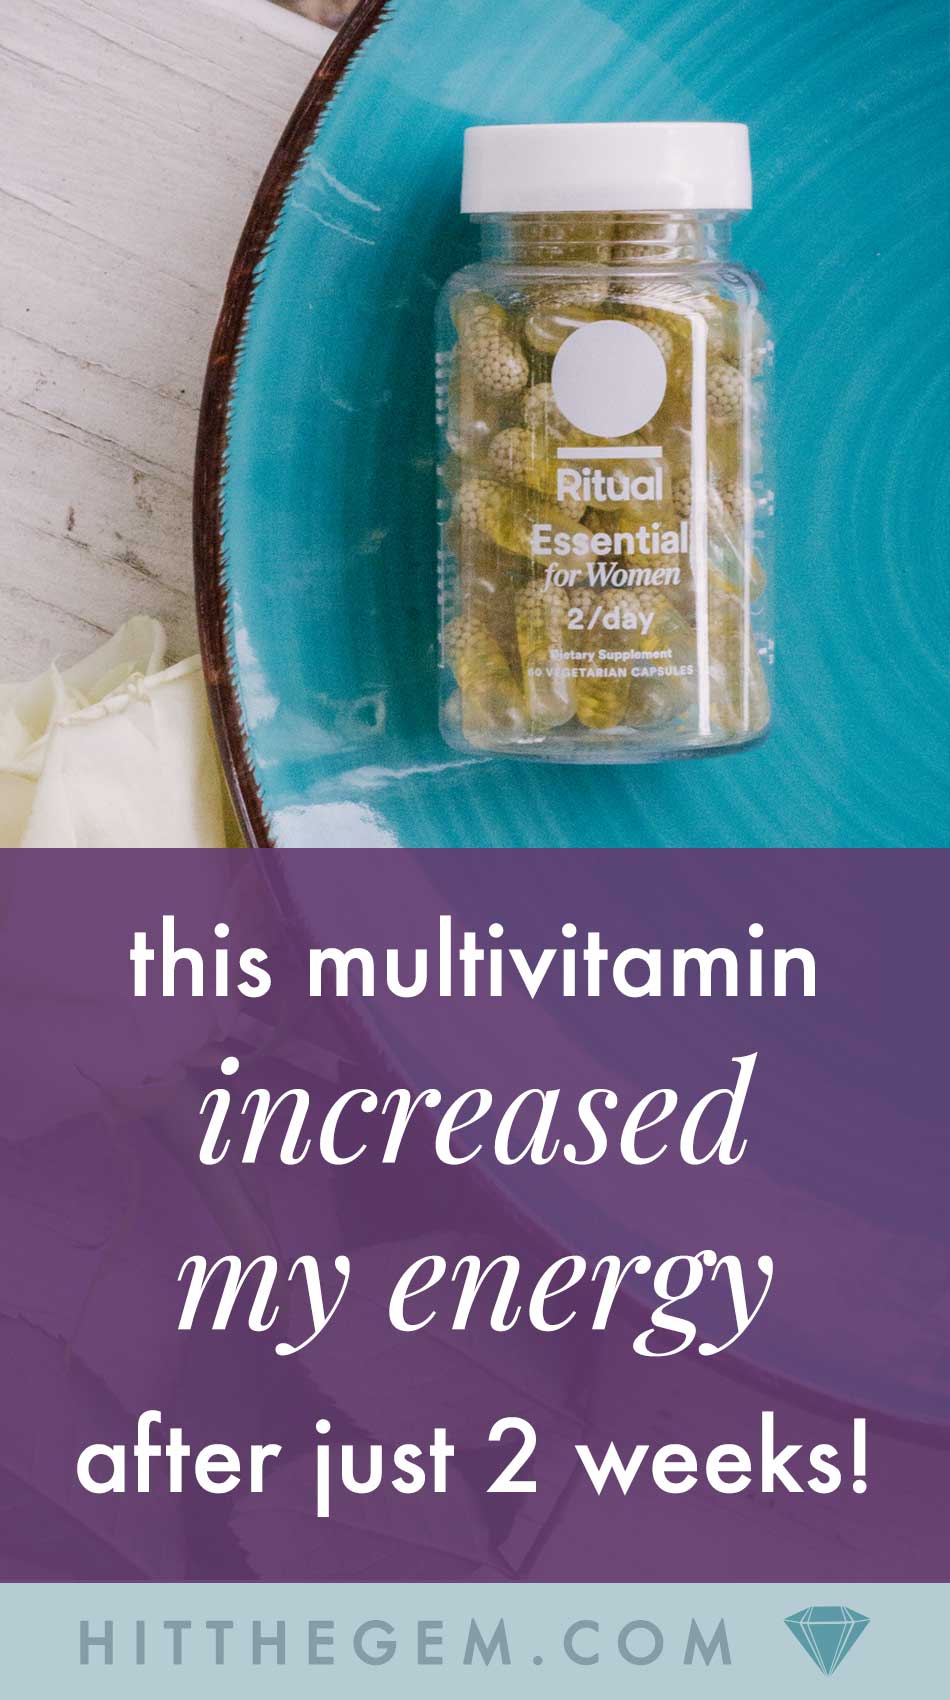 I recently added Ritual Vitamins to my routine and they've given me more energy, are minty fresh, and have the best ingredients.